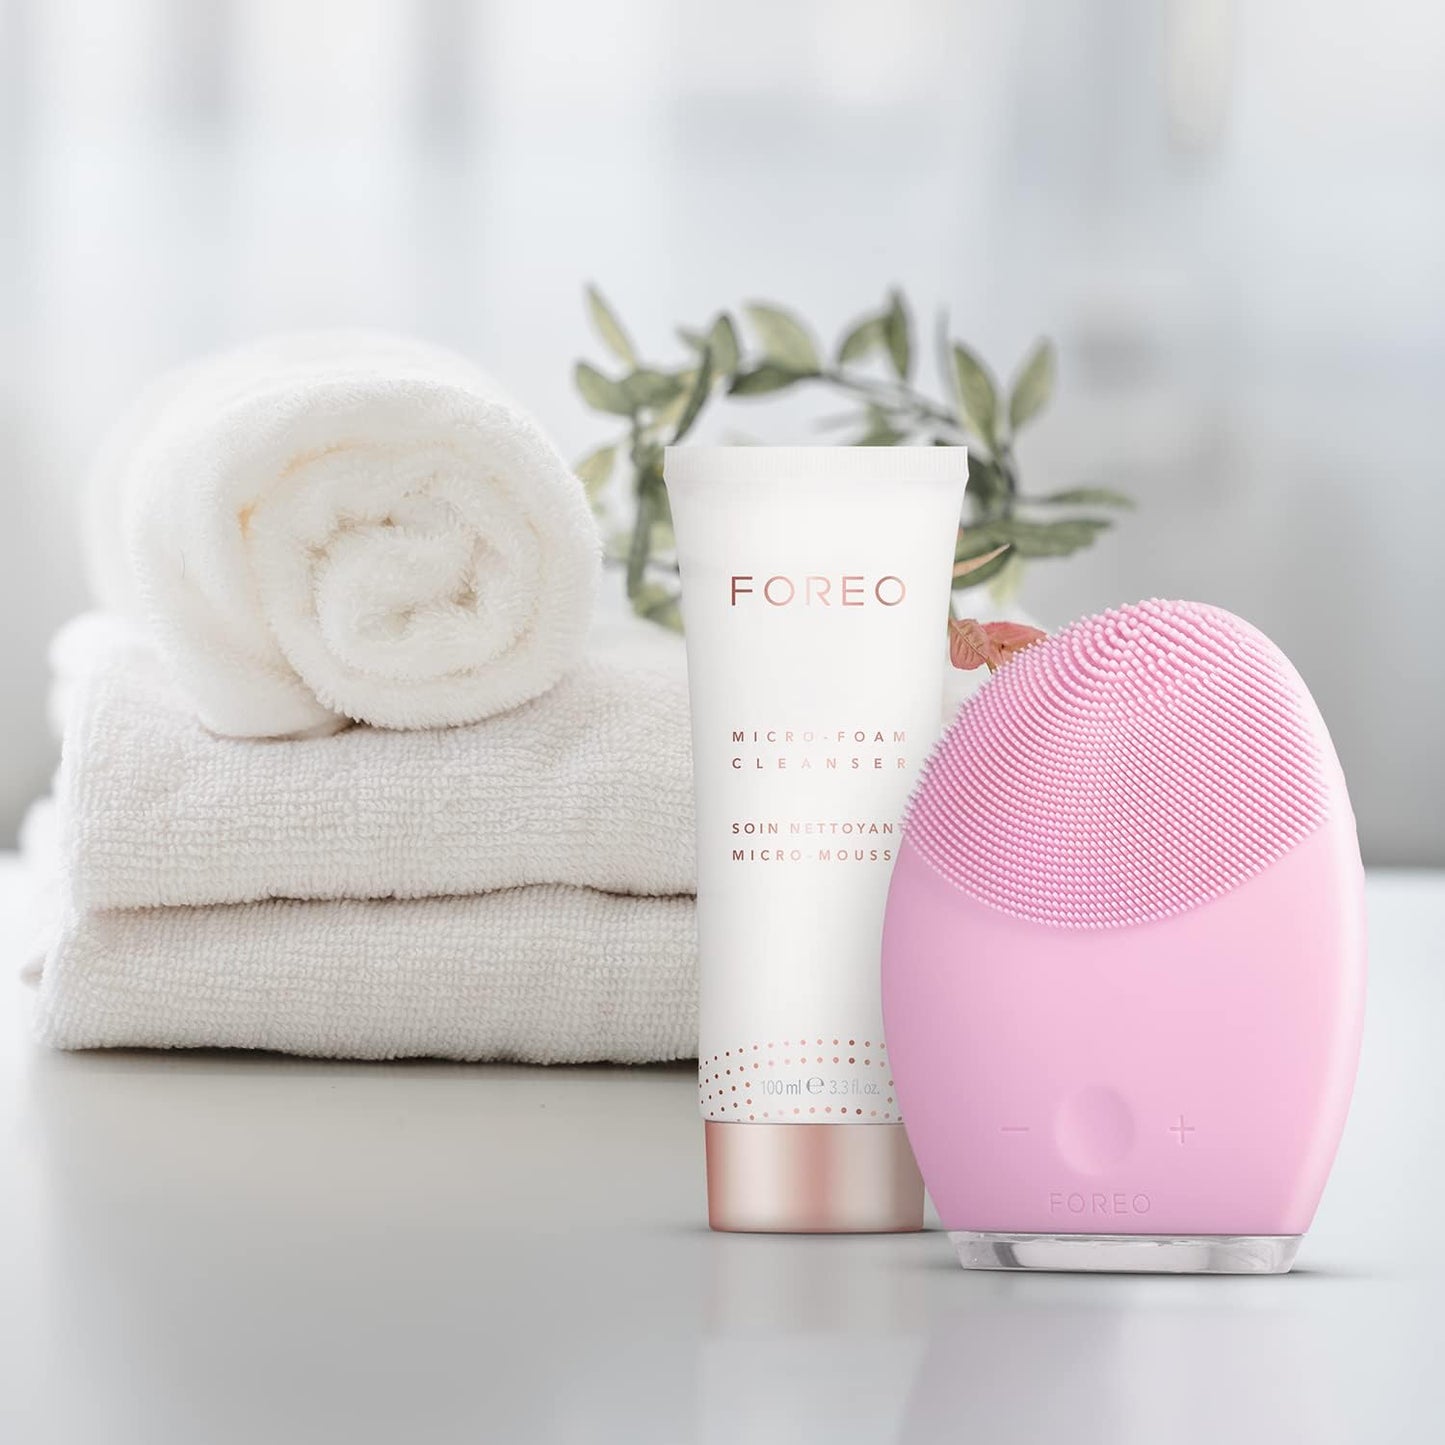 FOREO Micro-Foam Cleanser 100ml, Delicate Foaming Face Wash for All Skin Types, Cruelty-Free, Clean, Vegan Formula Dermatologically Tested, Non-stripping, Gently Melts Deep In-Pore Impurities